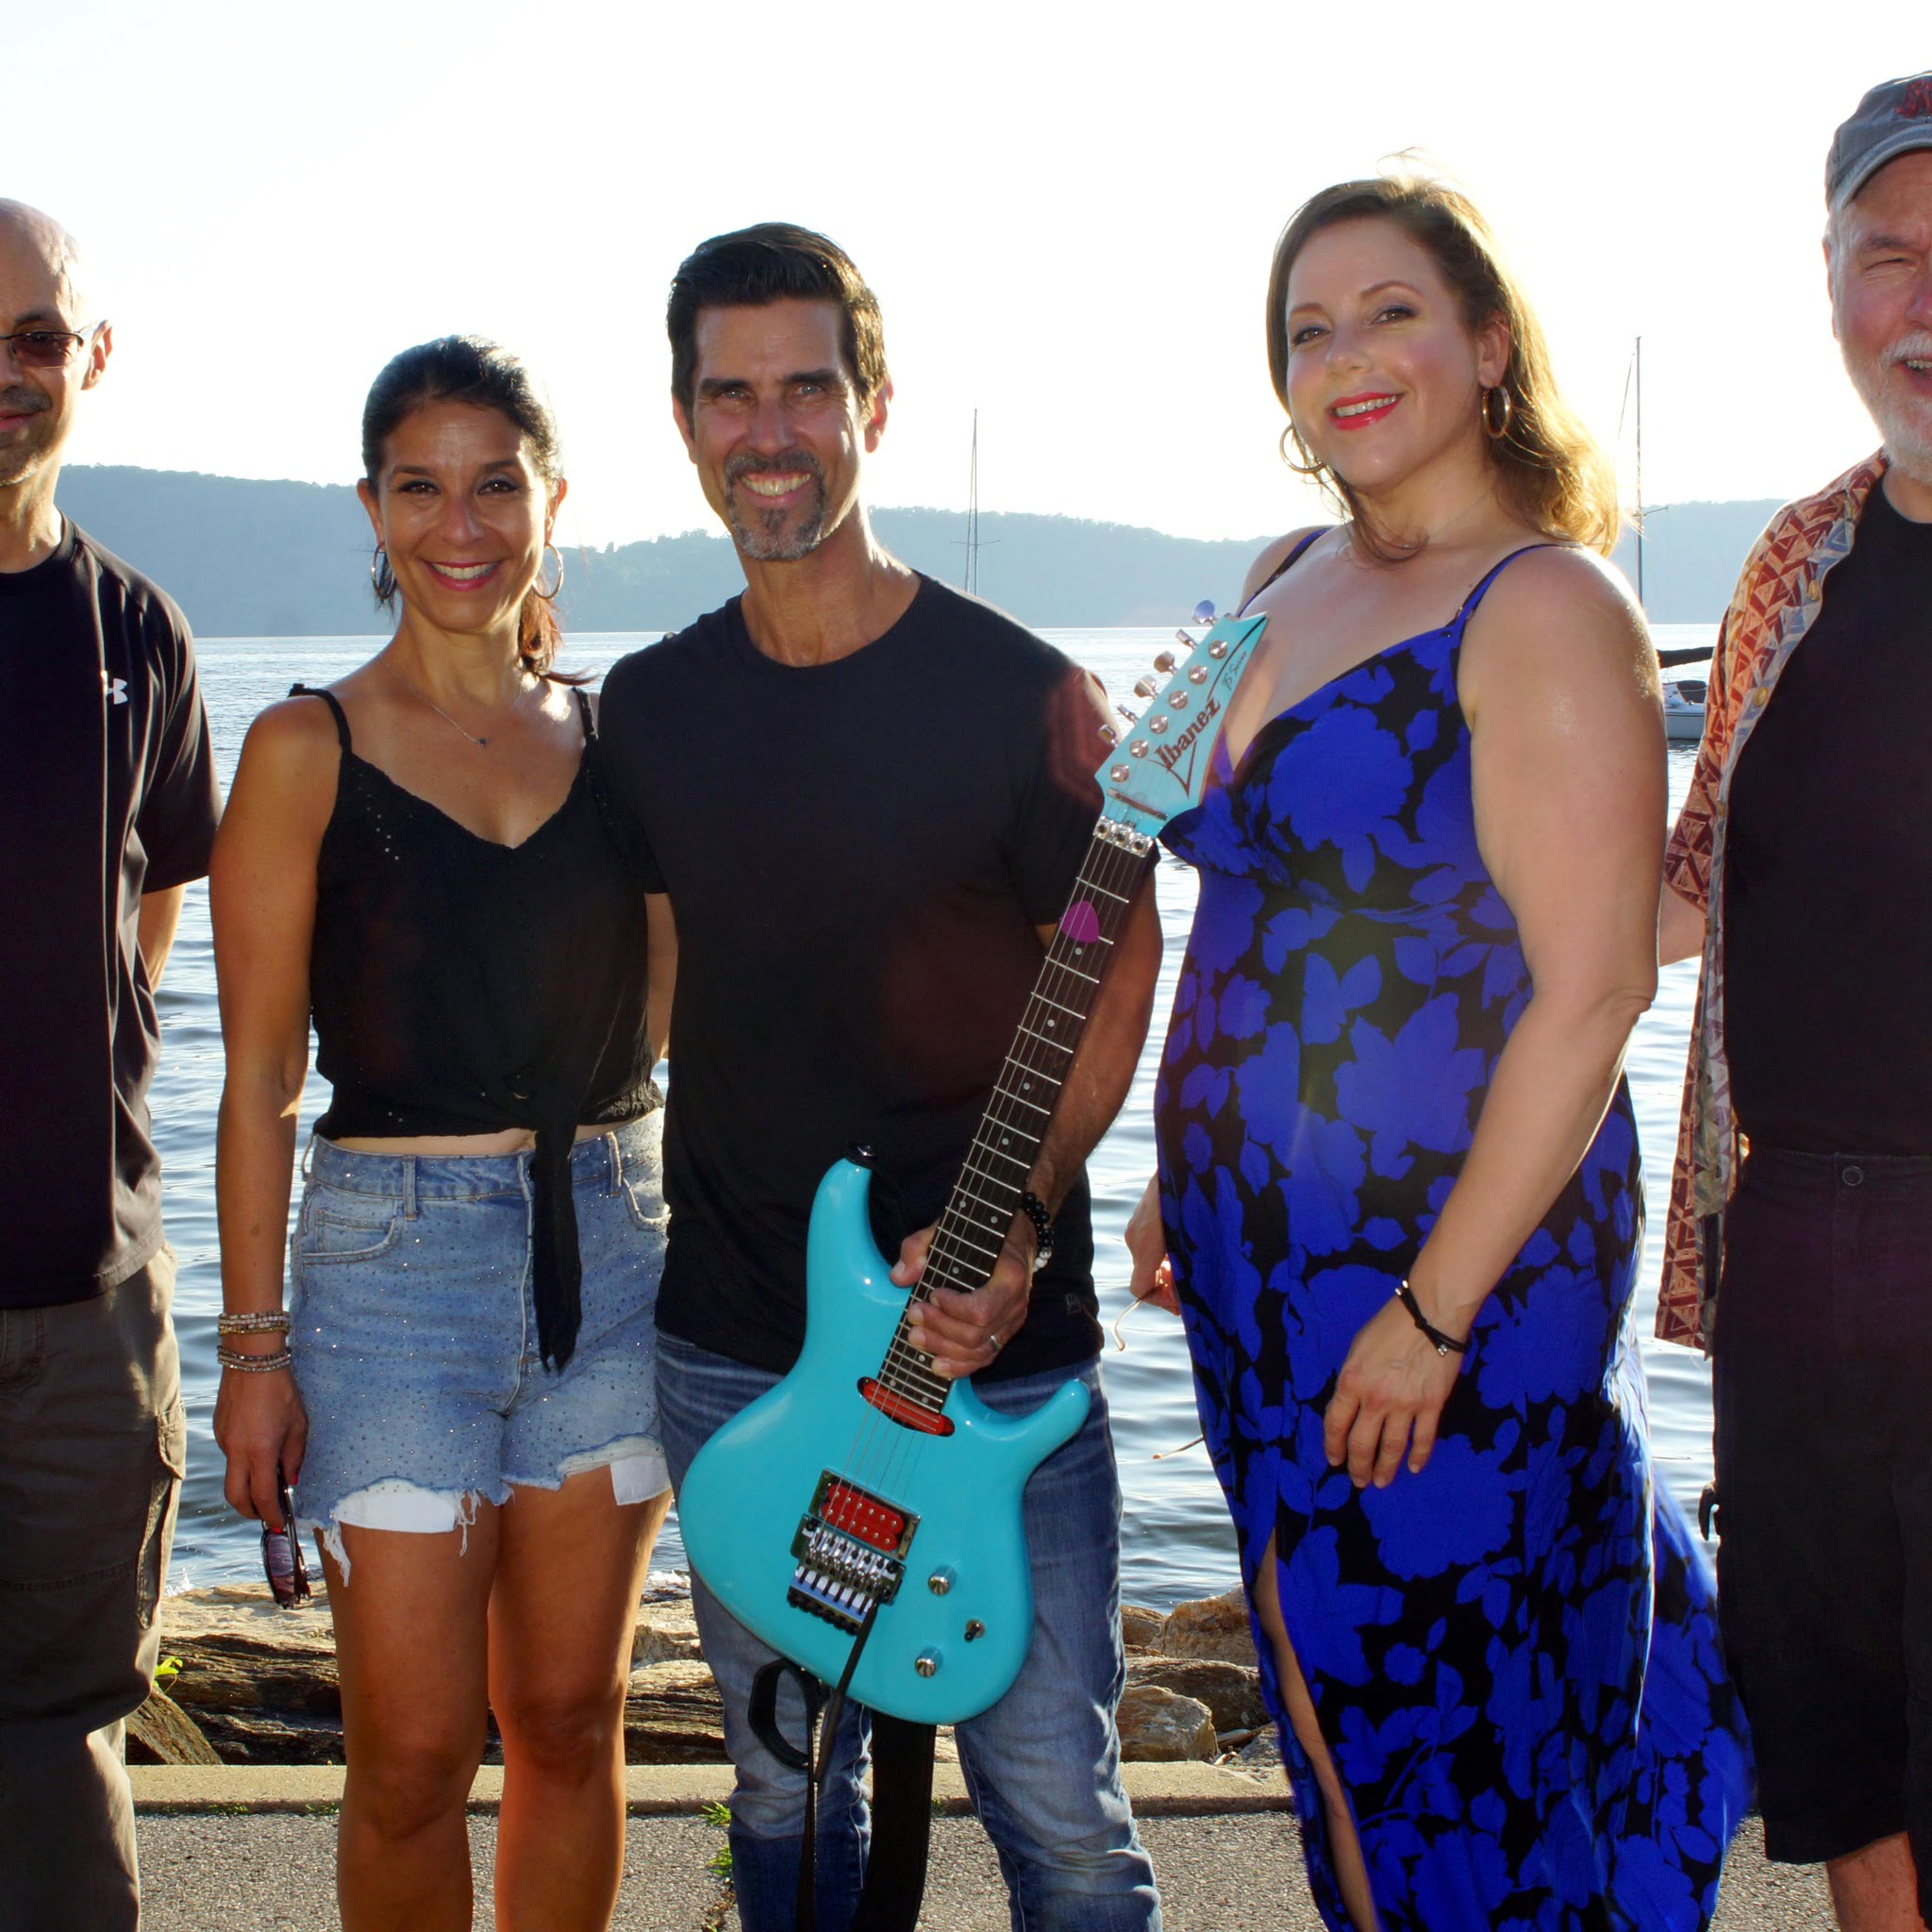 The Mike Risko Band posing in front of the river on a beautiful day.